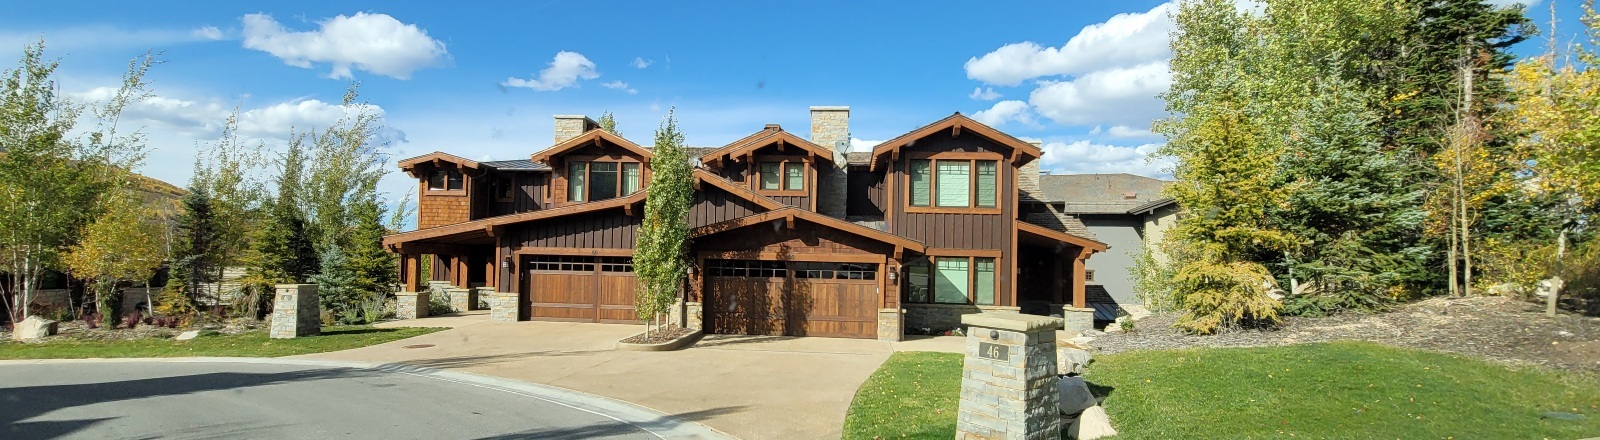 Northside Village is a group of single-family homes in Empire Pass at Deer Valley Resort